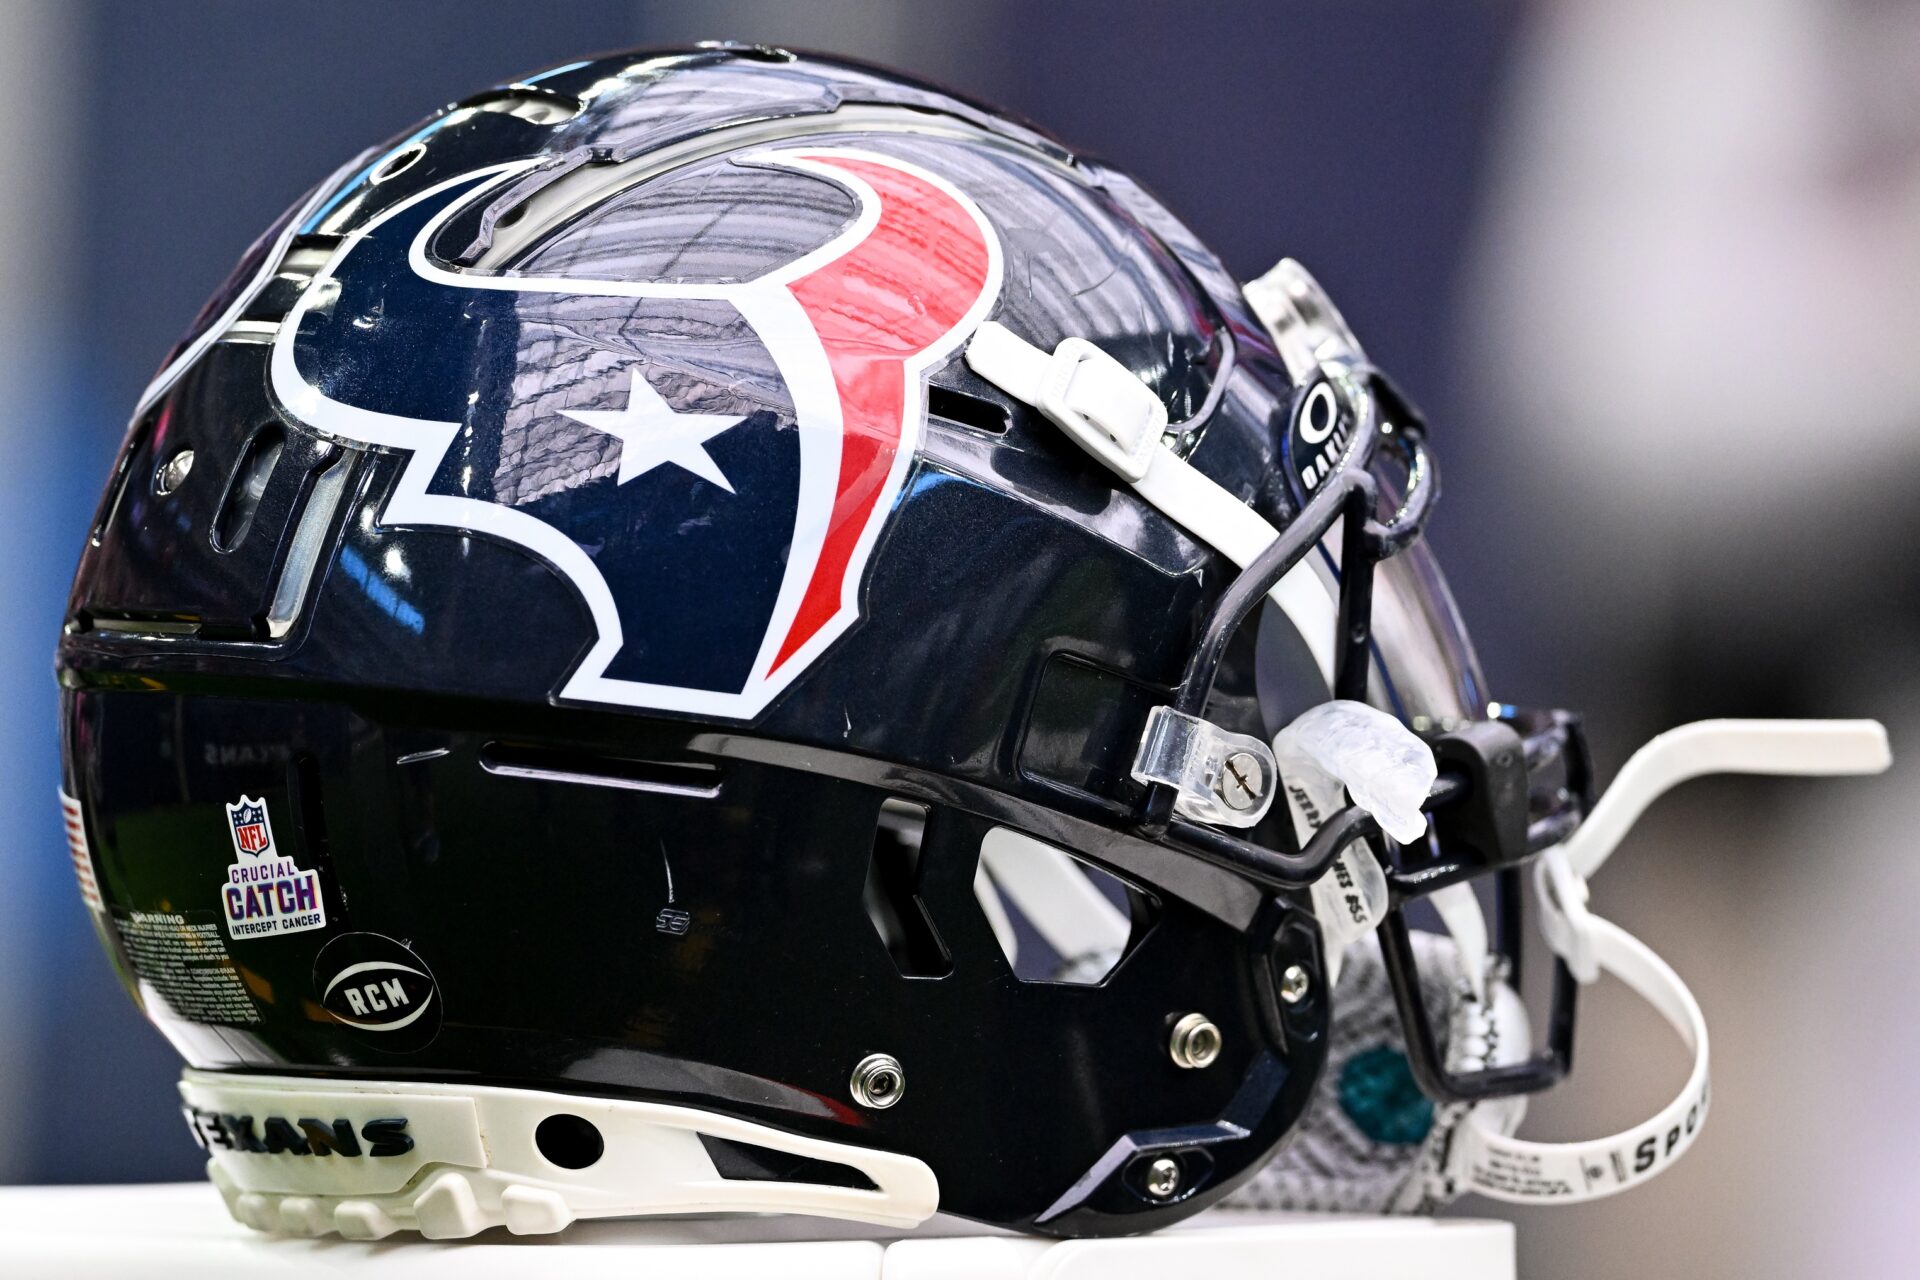 A detailed view of a Curcial Catch decal on a Houston Texans helmet on the sideline prior to the game against the New Orleans Saints at NRG Stadium.